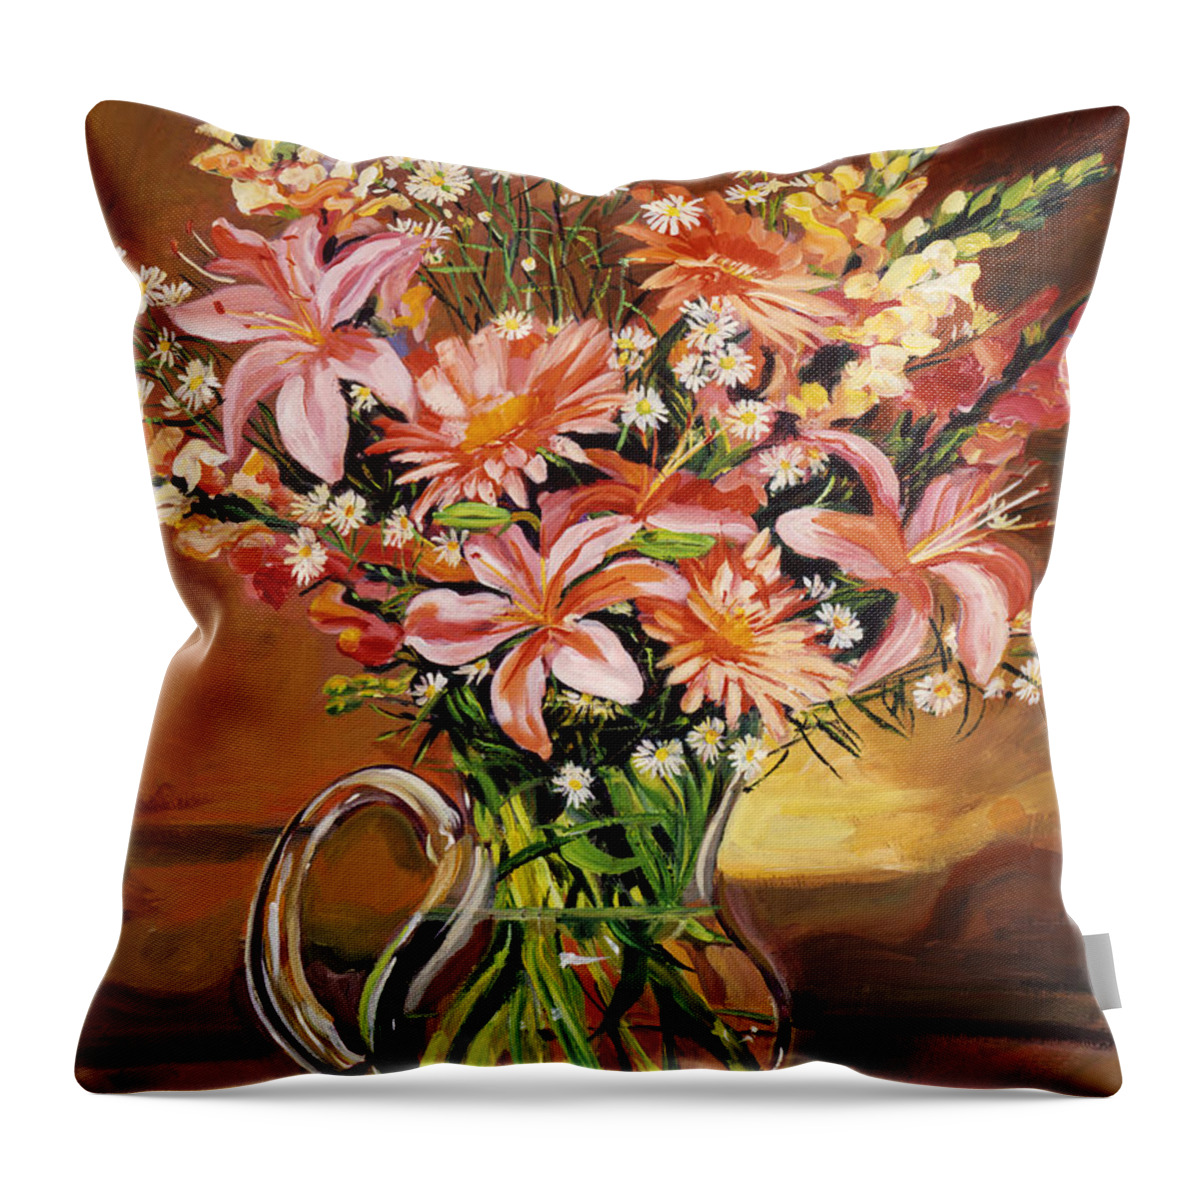 Flower Arrangement Throw Pillow featuring the painting Flowers In Glass by David Lloyd Glover